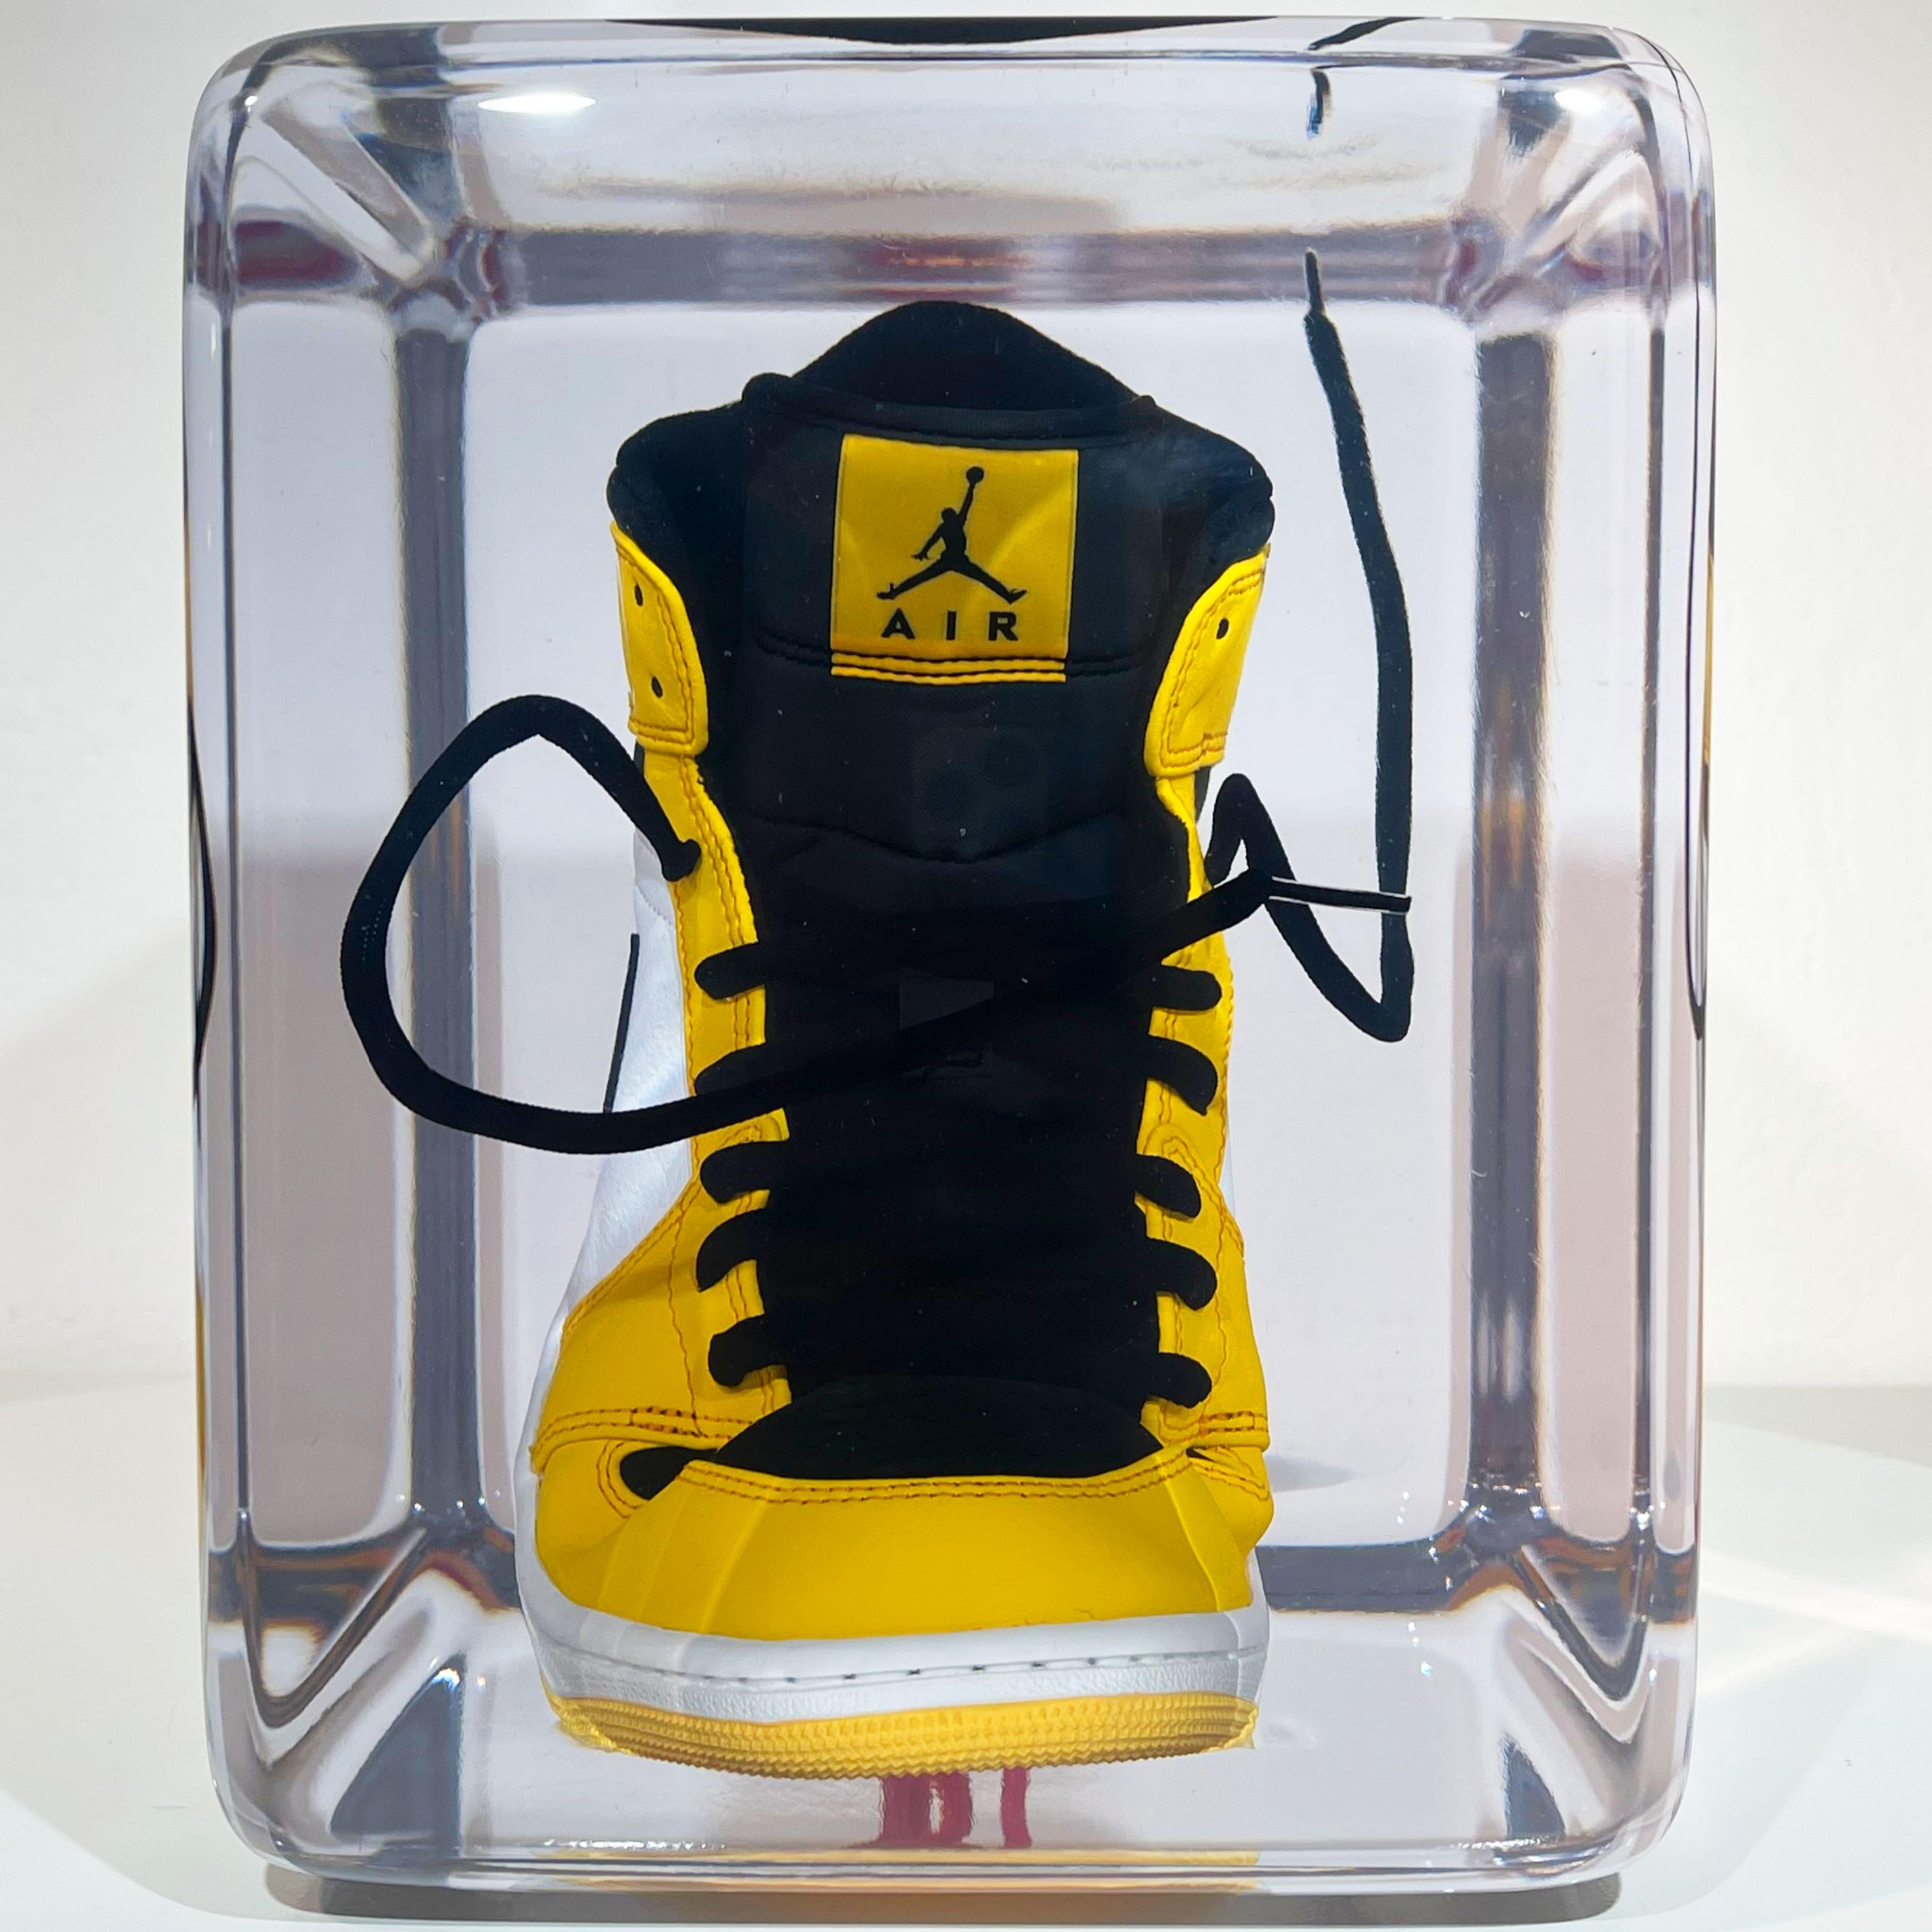 Sneakers & Gum Taxi Yellow tone Sculpture Edition 03/20 For Sale 1